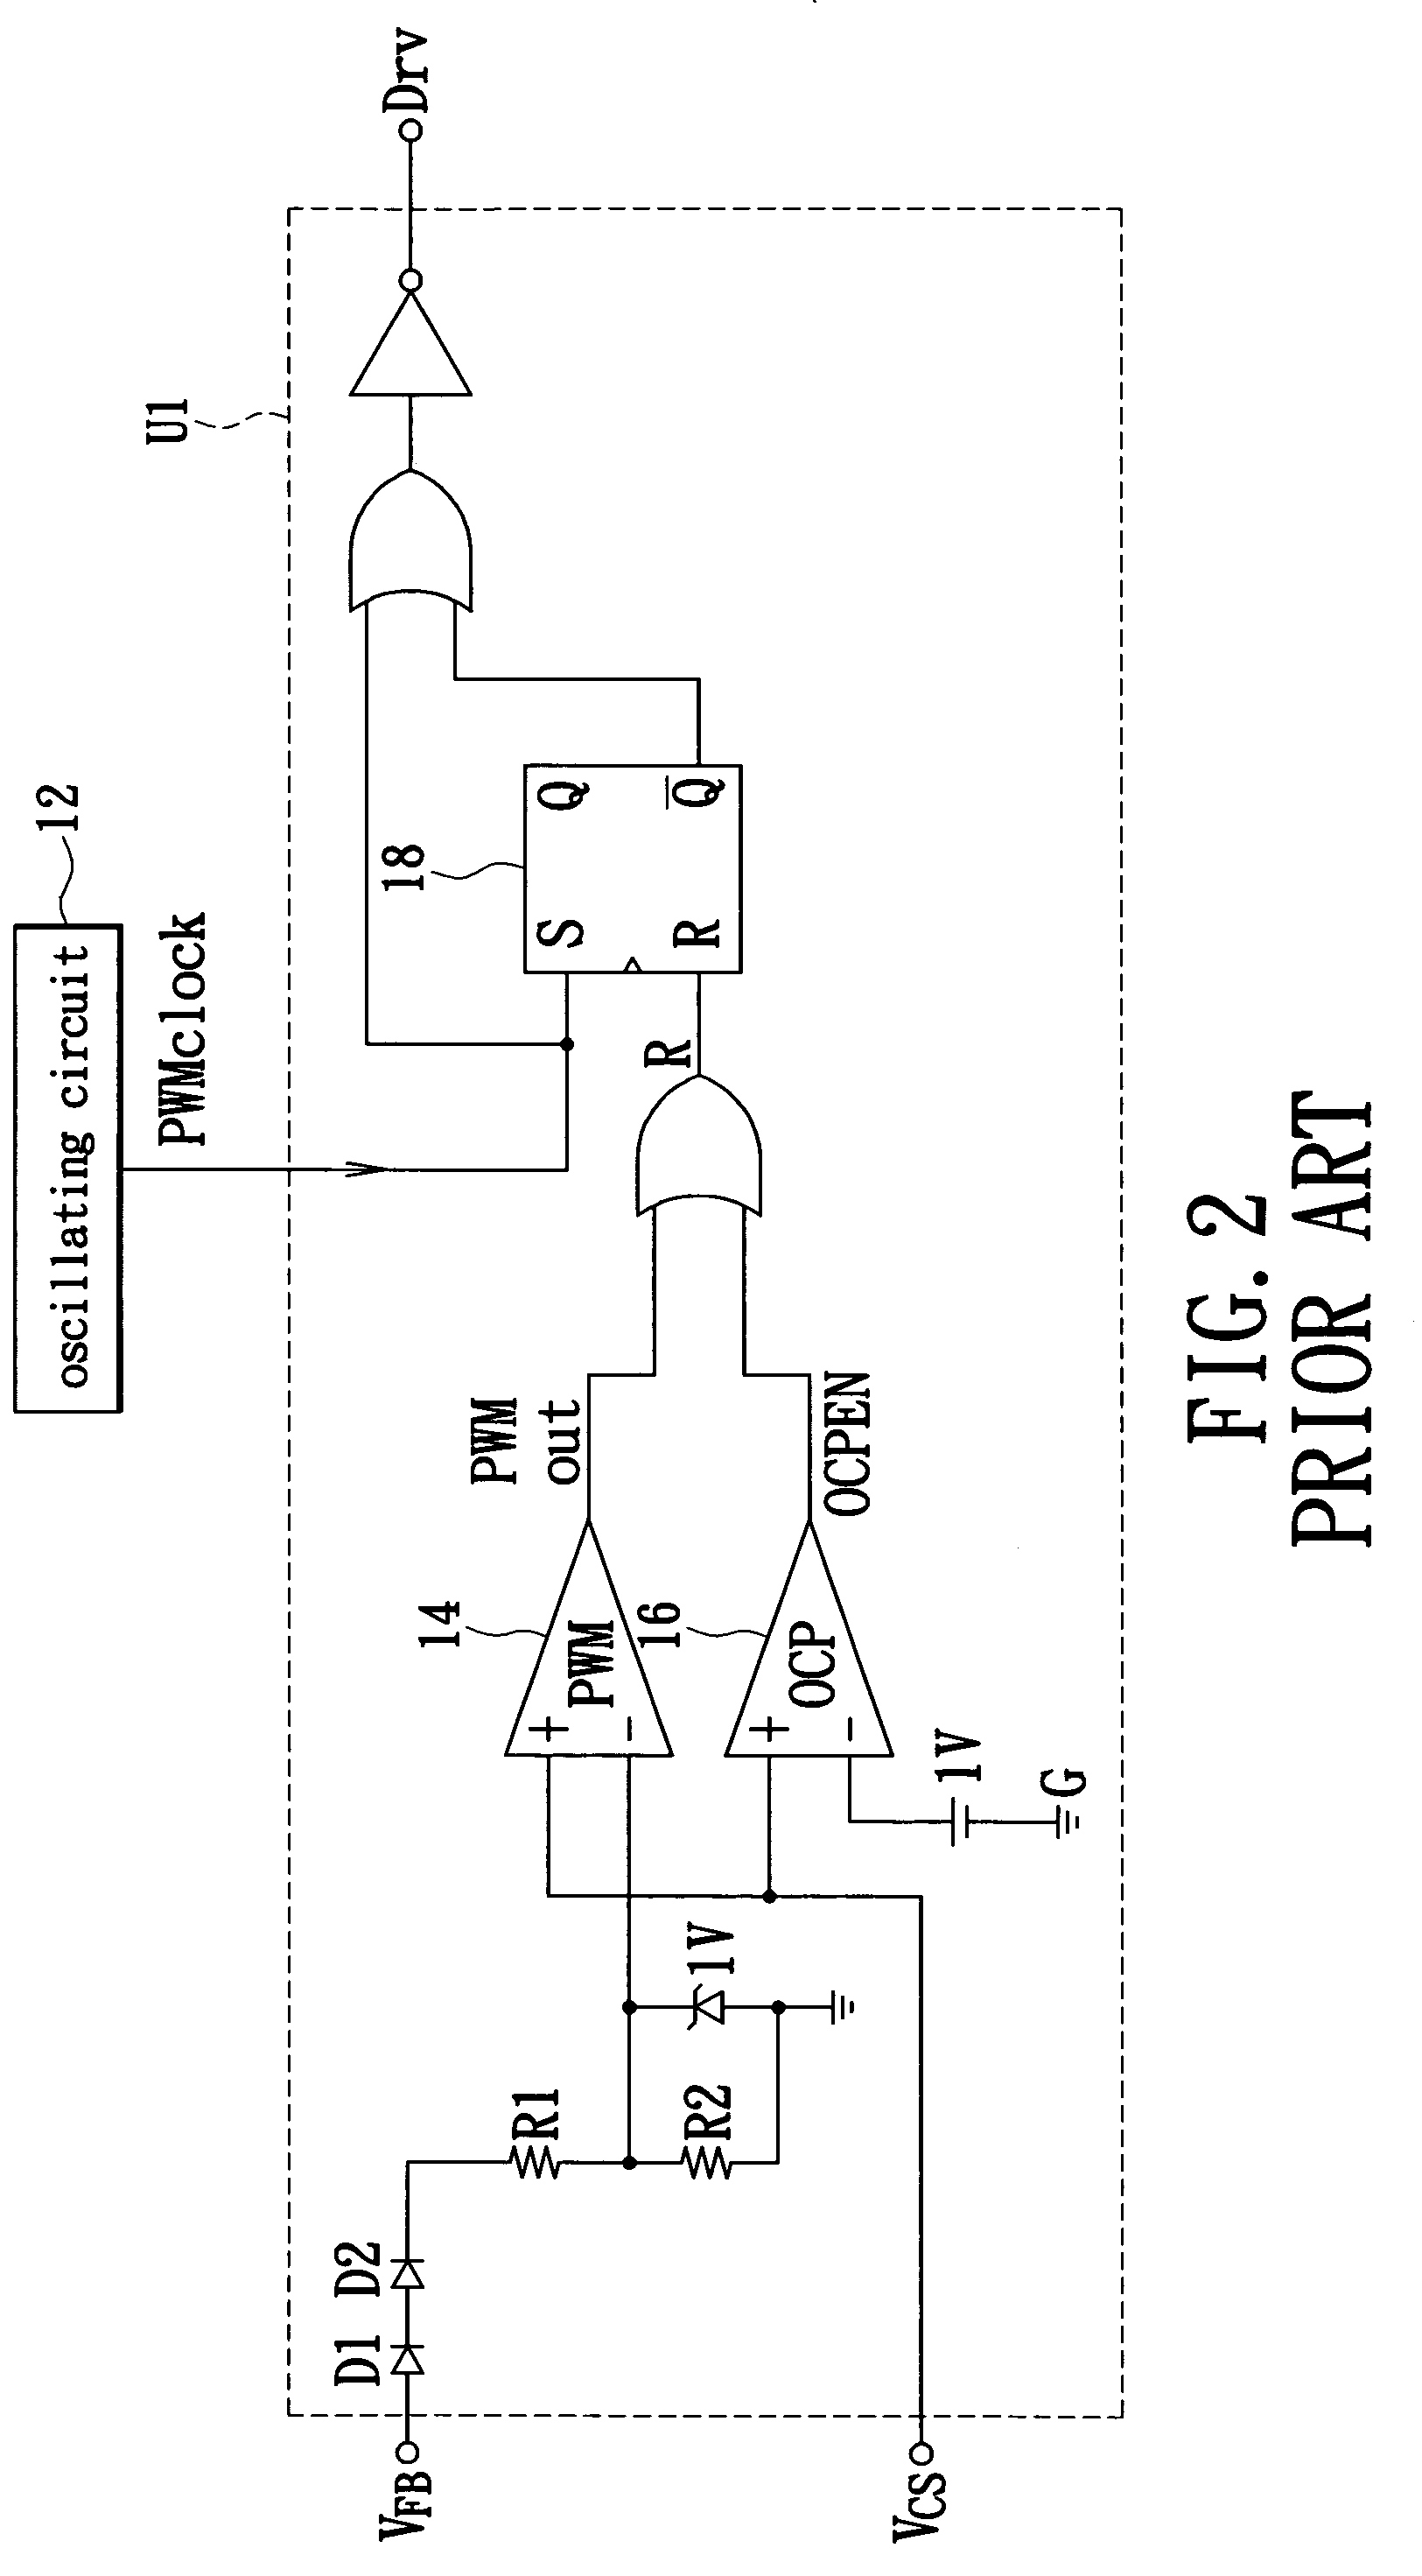 Pulse width modulation device with a power saving mode controlled by an output voltage feedback hysteresis circuit